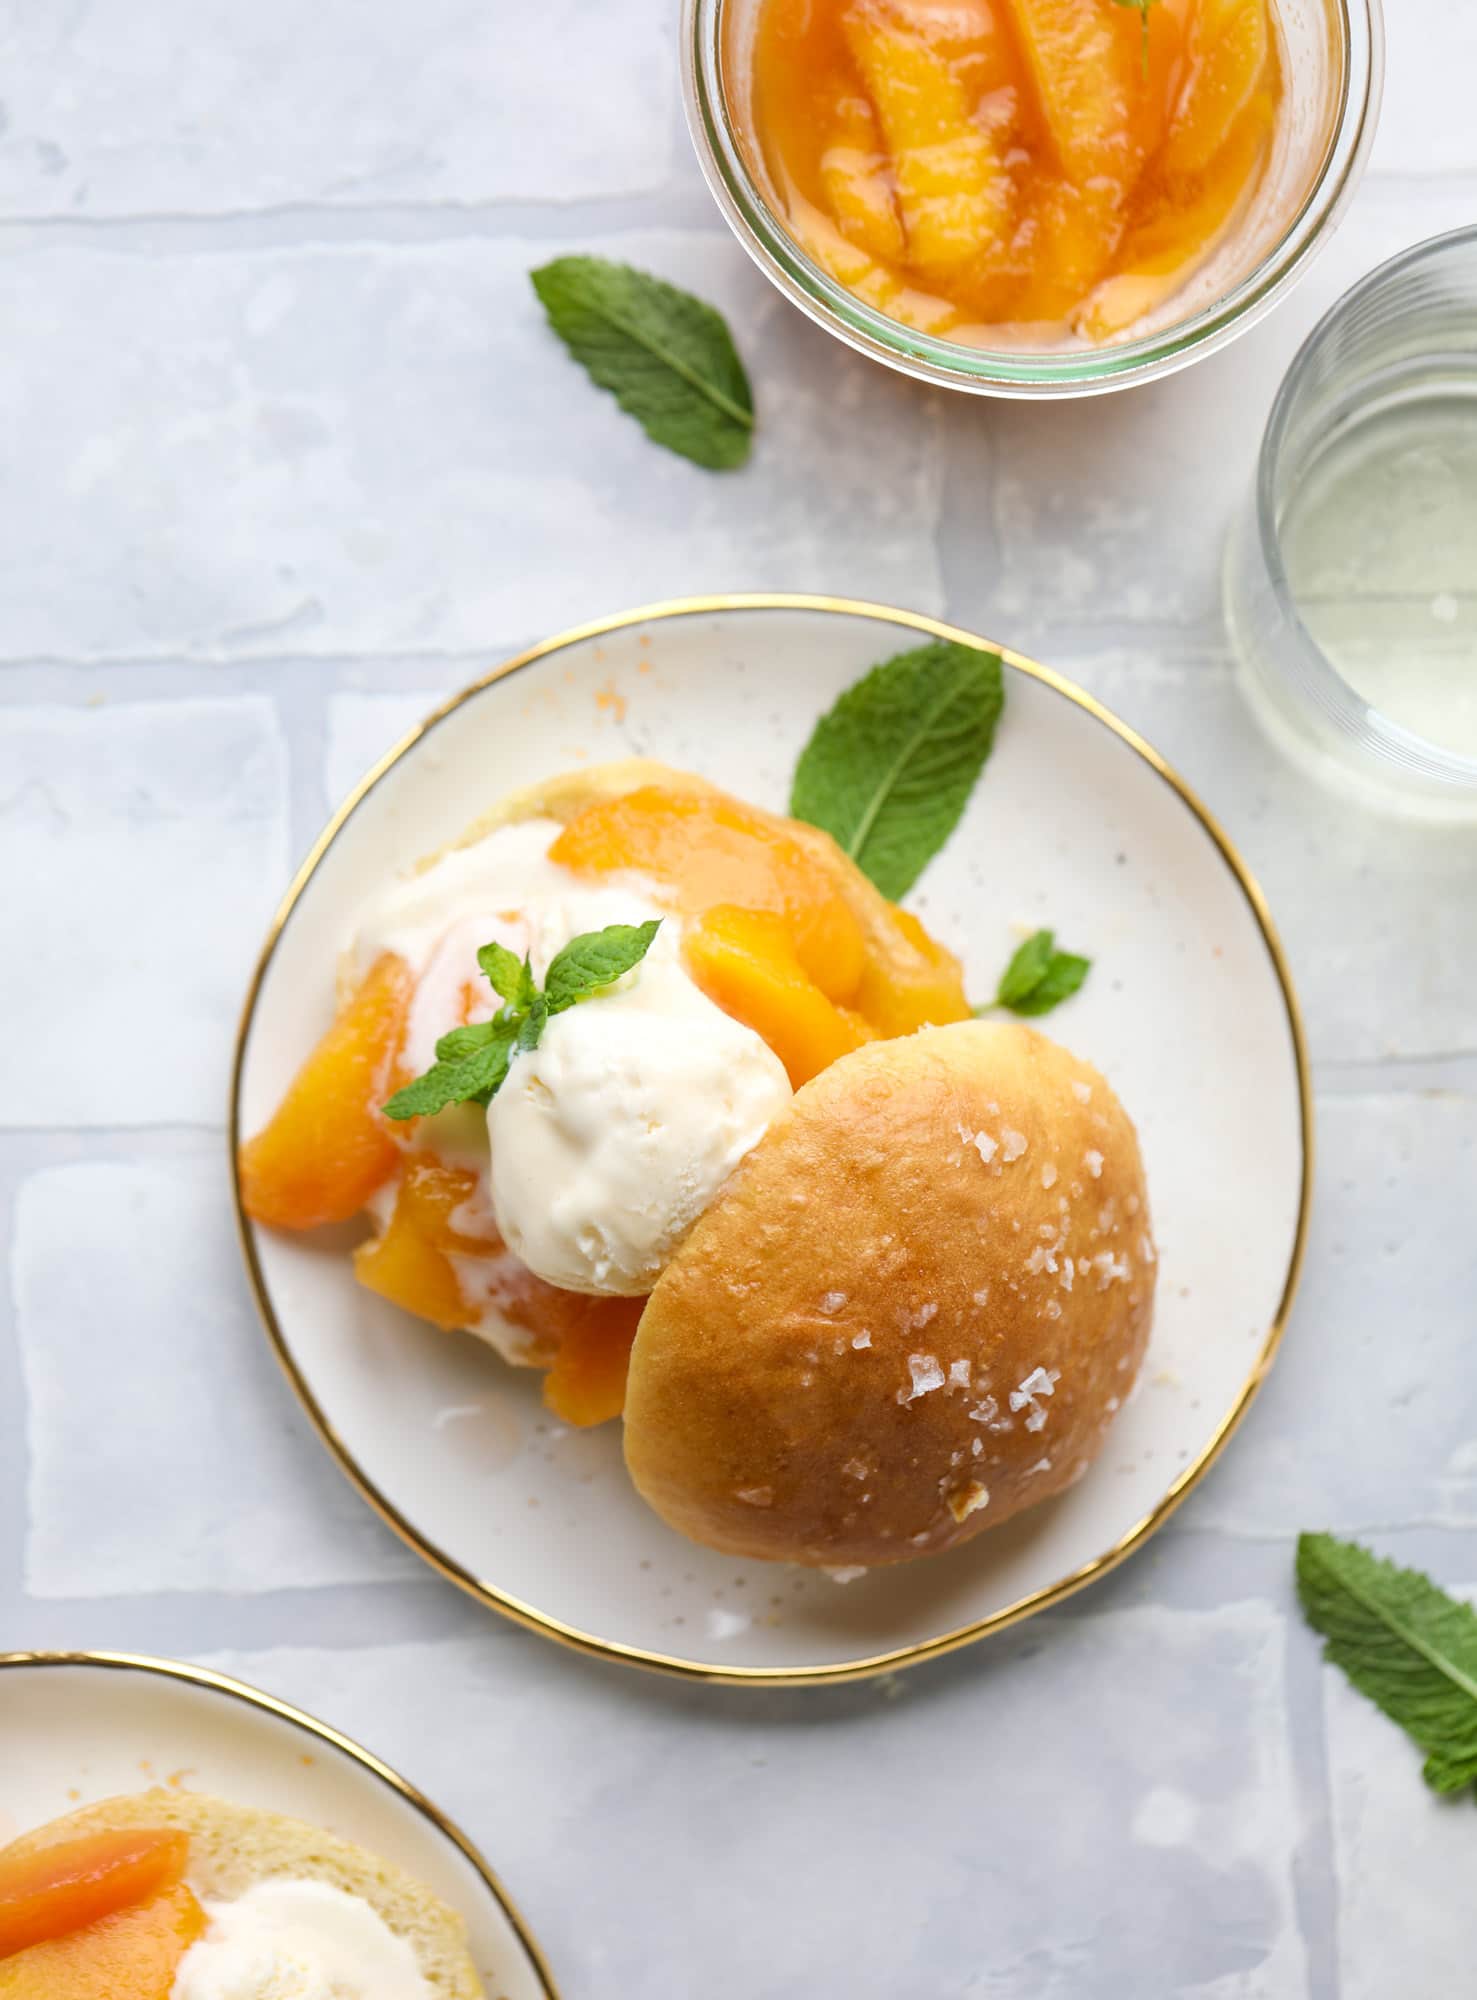 Prosecco peach shortcakes are out of these world! Prosecco poached peaches with vanilla ice cream on homemade salted brioche buns. To die for.